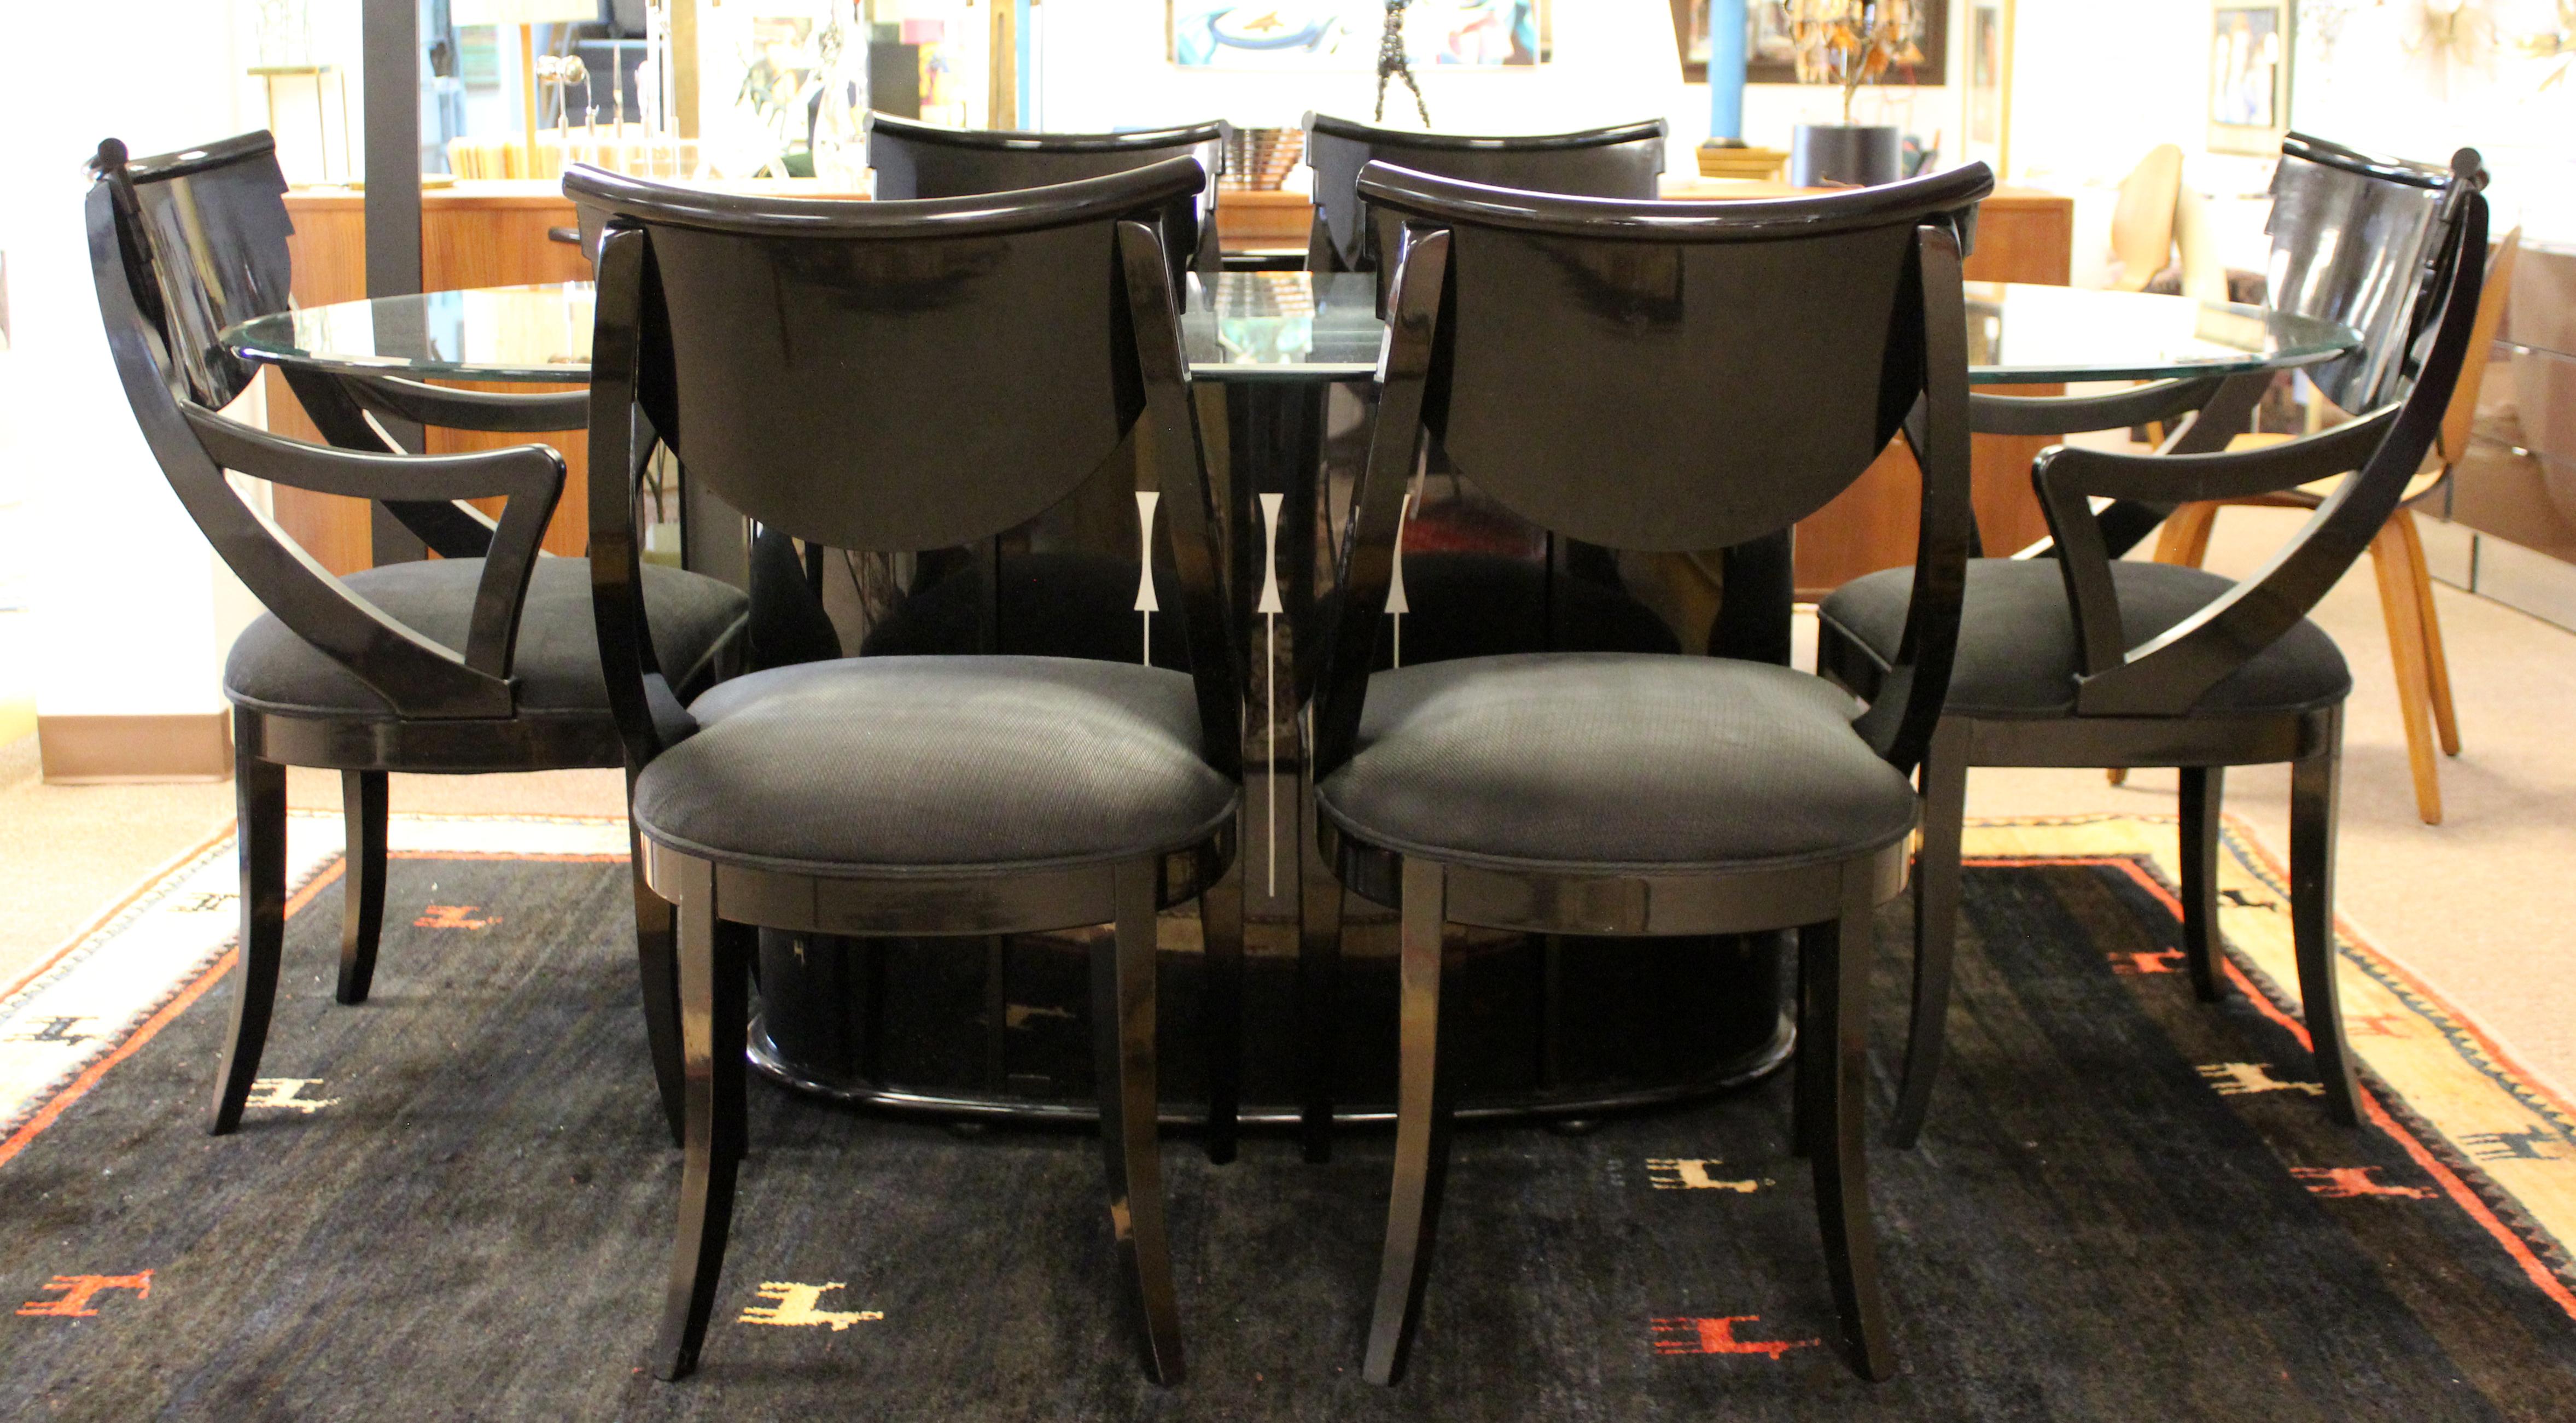 For your consideration is a lux looking, black lacquer dining set, including table with storage compartment, two armchairs and four side chairs, by Pietro Constantini for Ello, made in Italy, circa 1970s. In excellent vintage condition. The